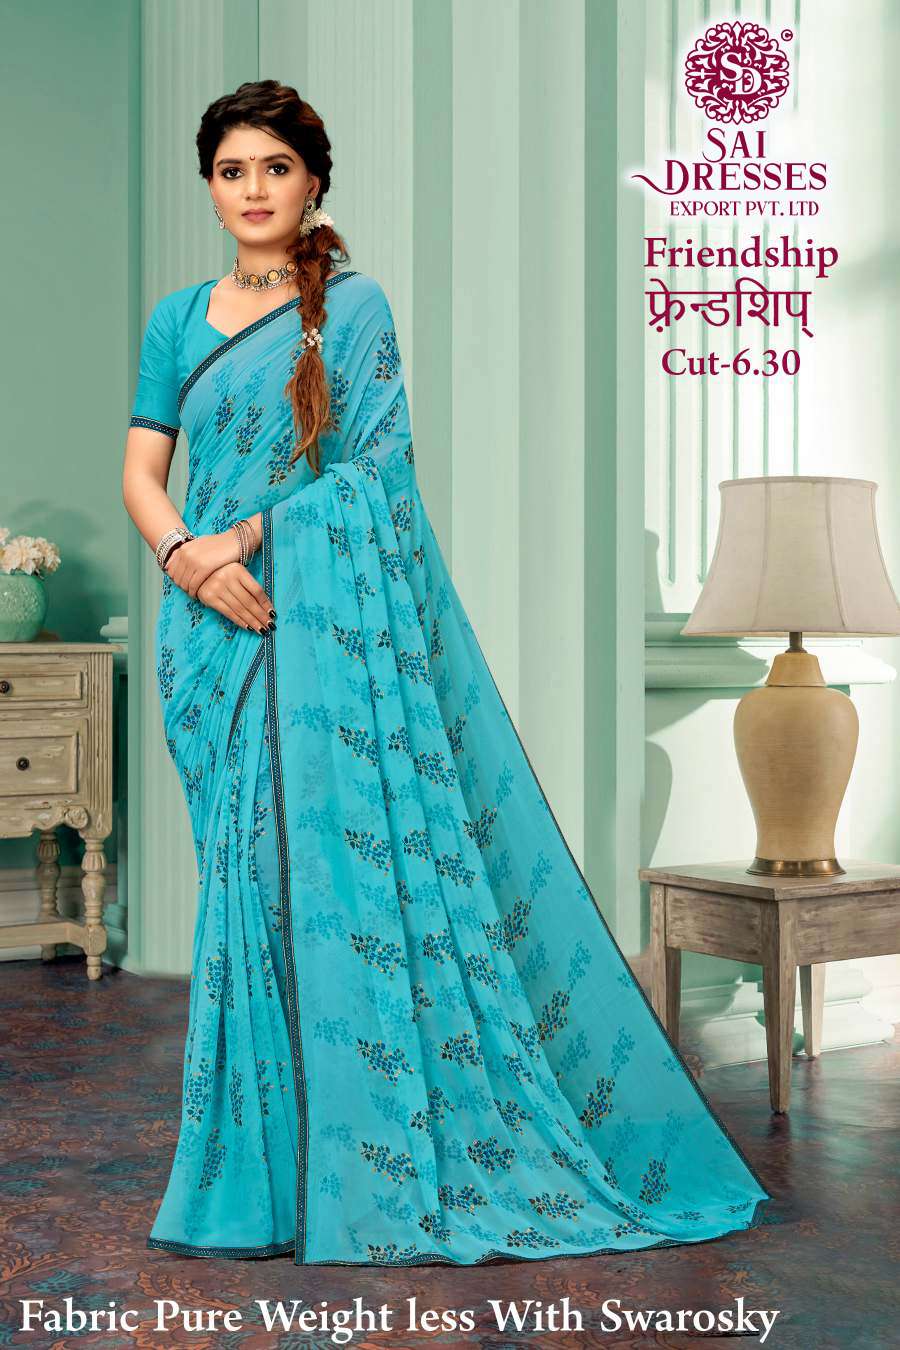 SAI DRESSES PRESENT FRIENDSHIP DAILY WEAR PURE WEIGHT LESS FABRIC WITH SWAROSKY WORK SAREE IN WHOLESALE RATE IN SURAT